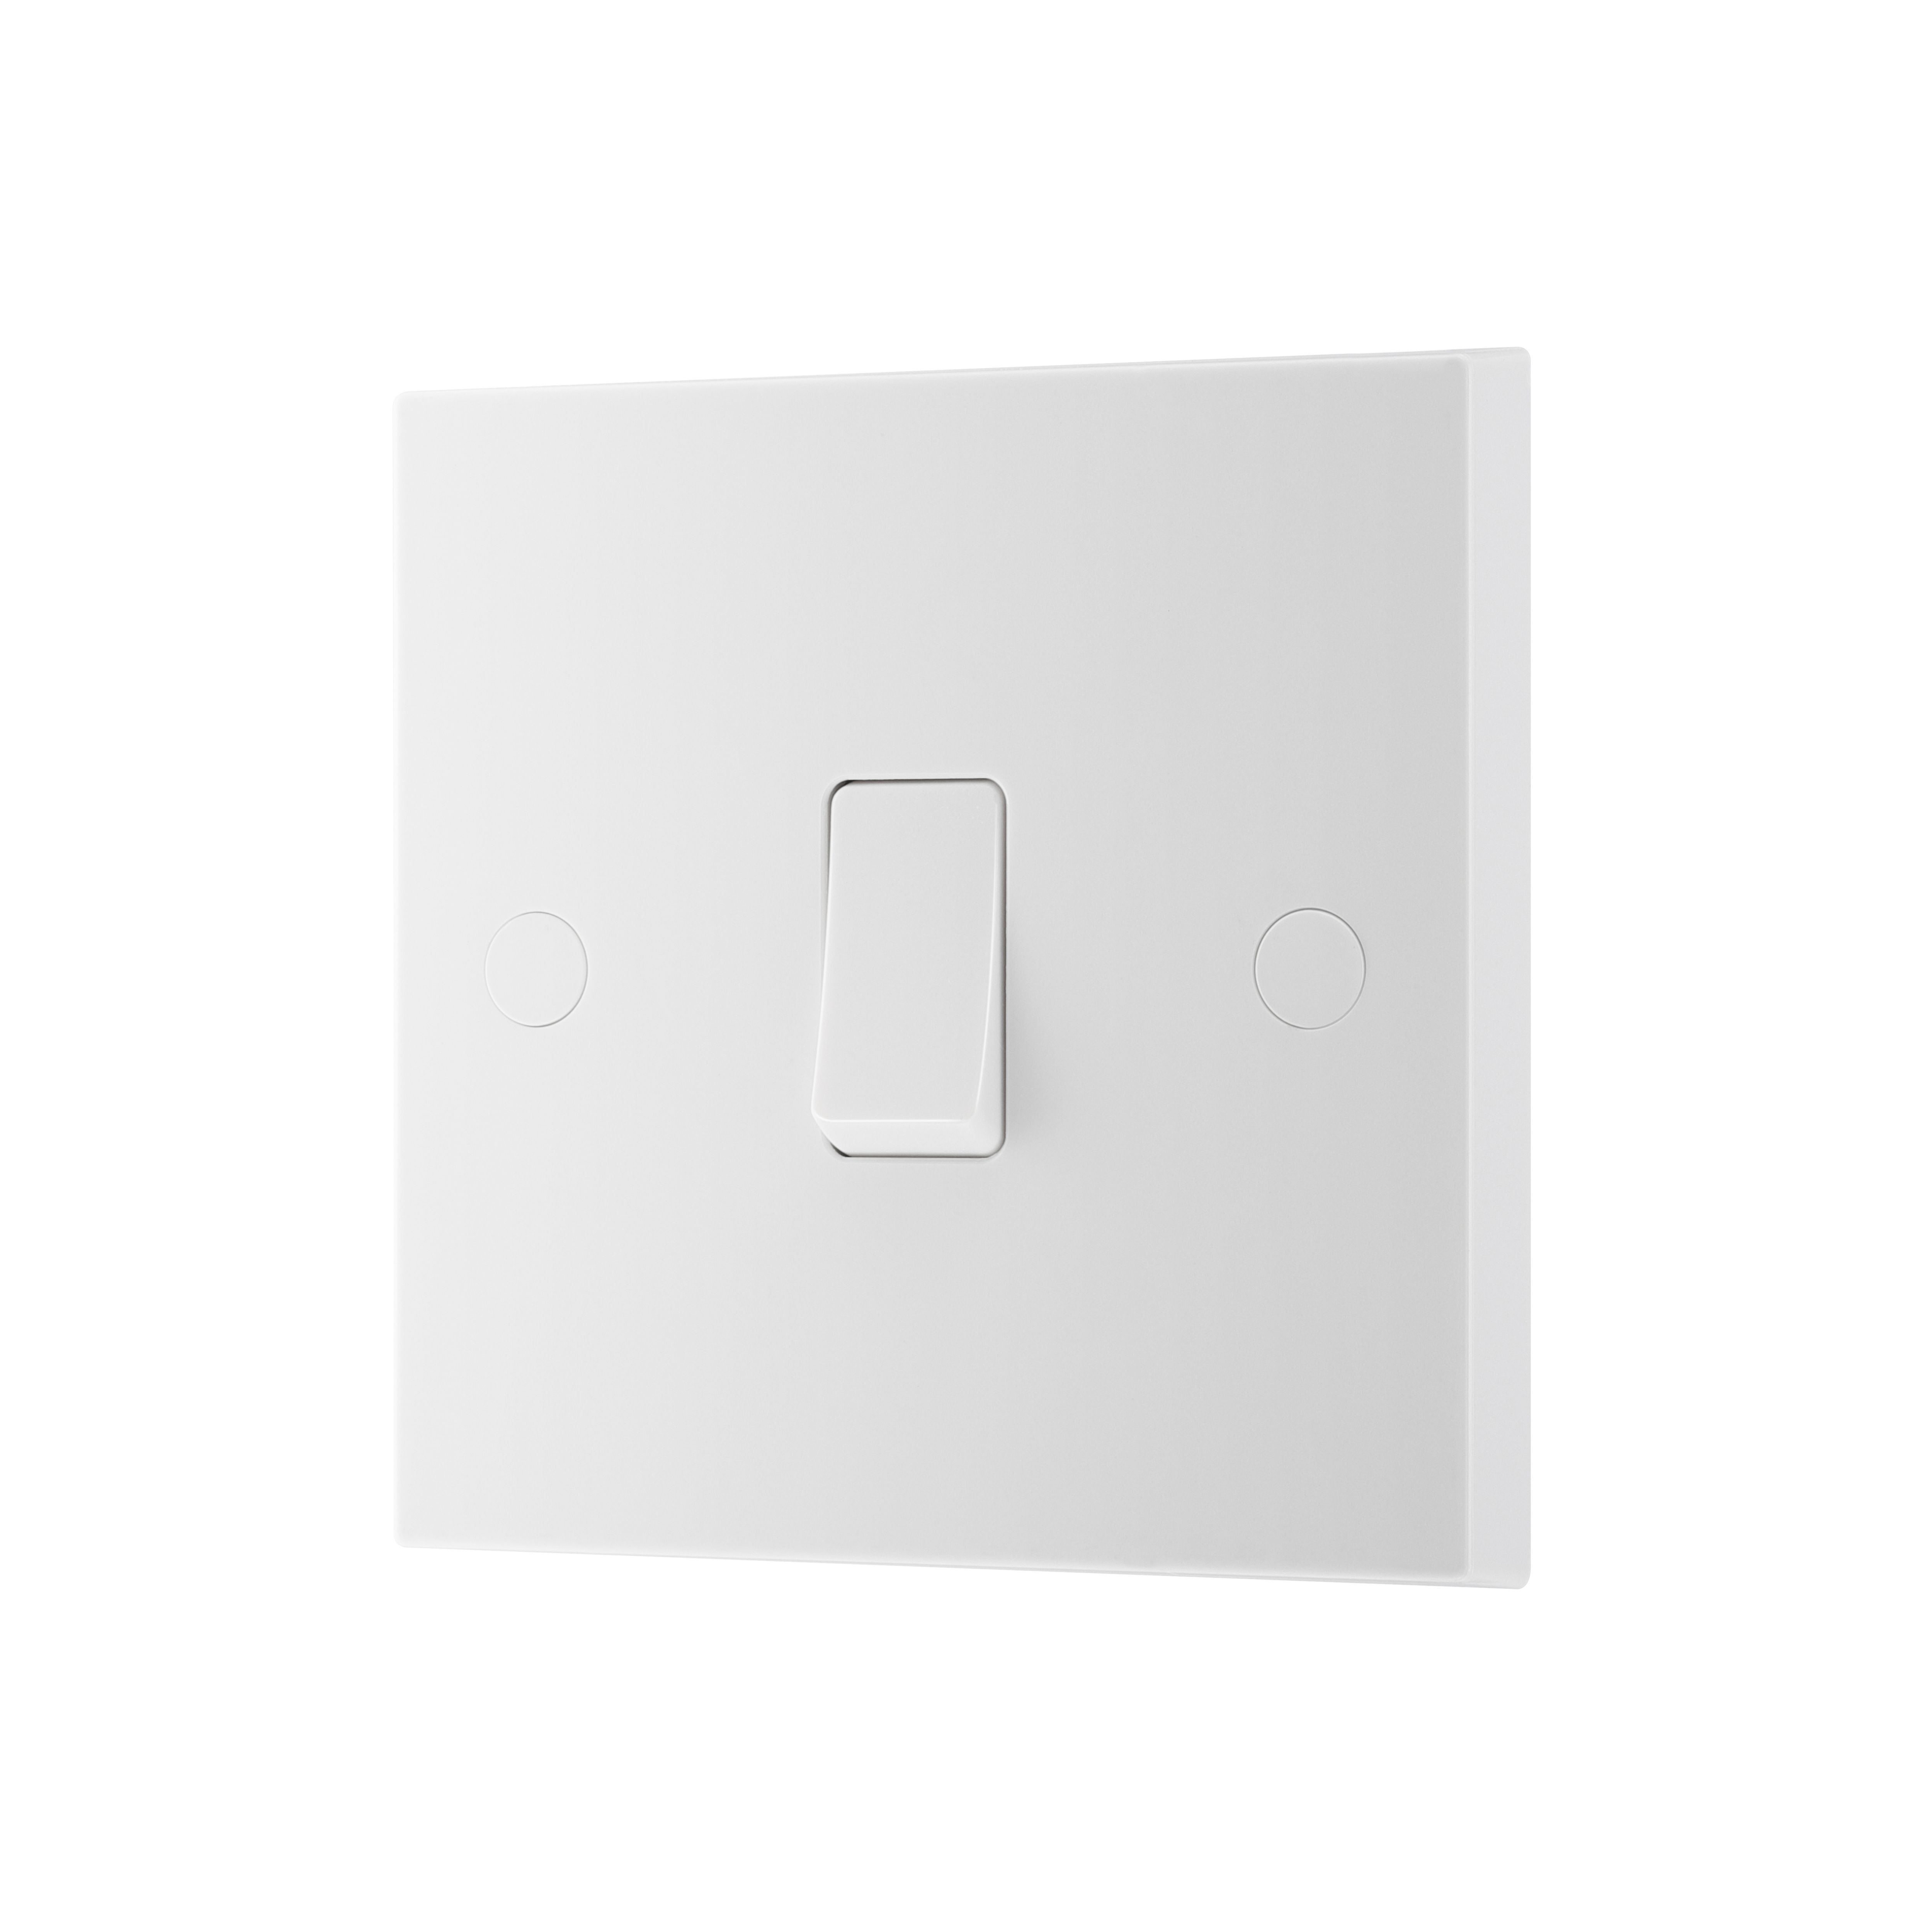 BG White 20A 2 way 1 gang Light Switch, Pack of 5